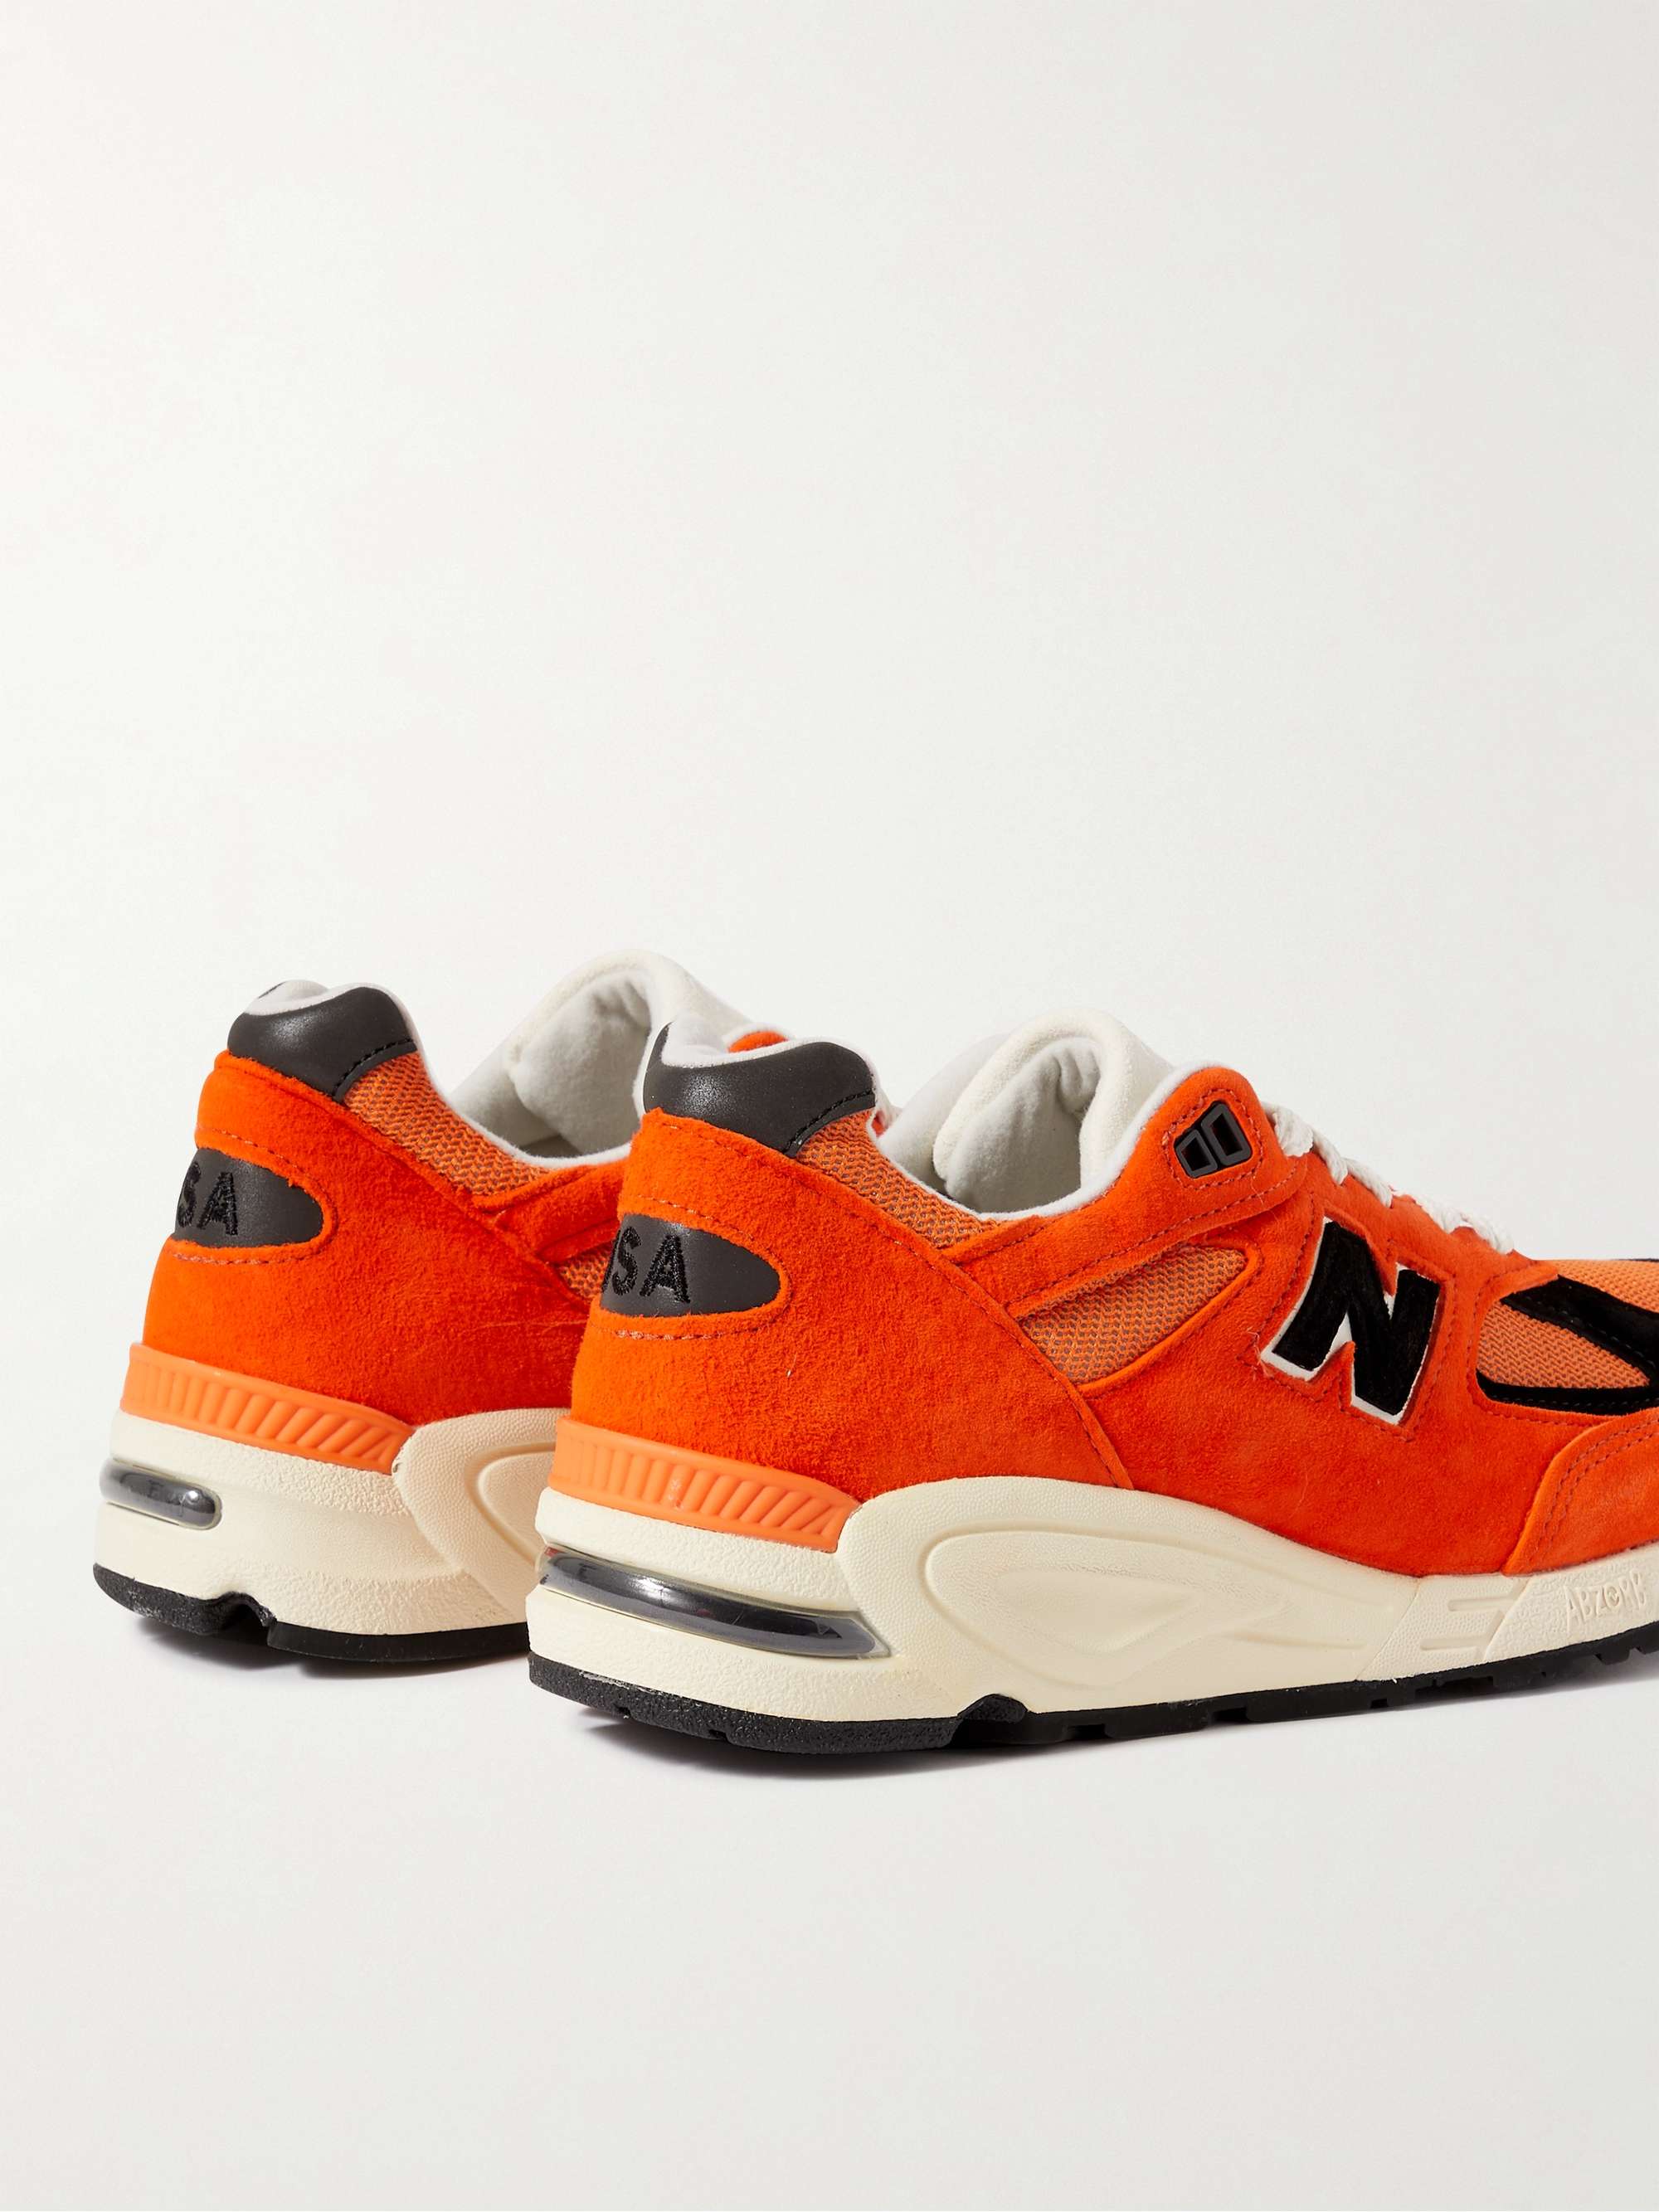 NEW BALANCE 990v2 Mesh and Suede Sneakers | MR PORTER